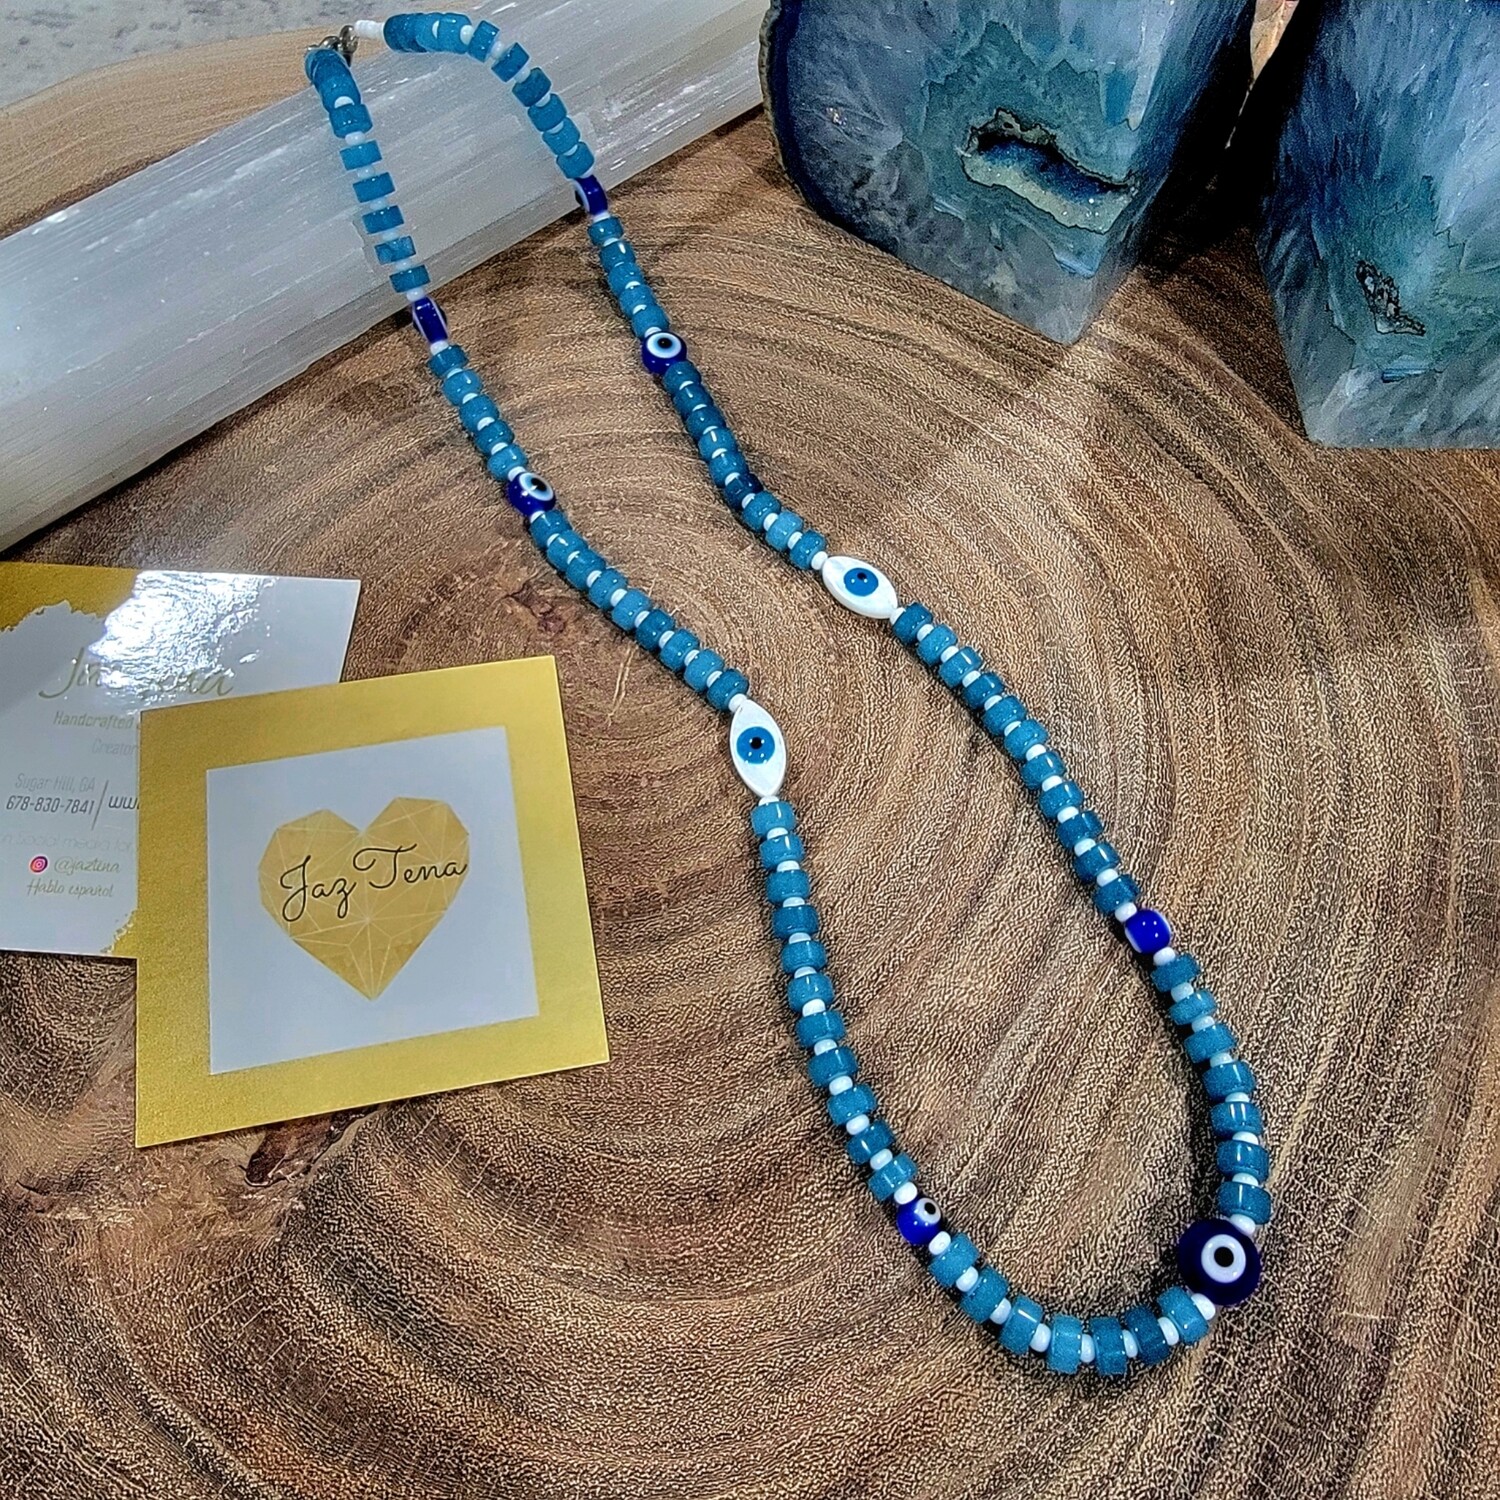 Aquamarine Natural Stone 3mm x 6mm Heishi Flat Beads necklace with lamp work evil eye and Blue Evil Eye shell Beads.